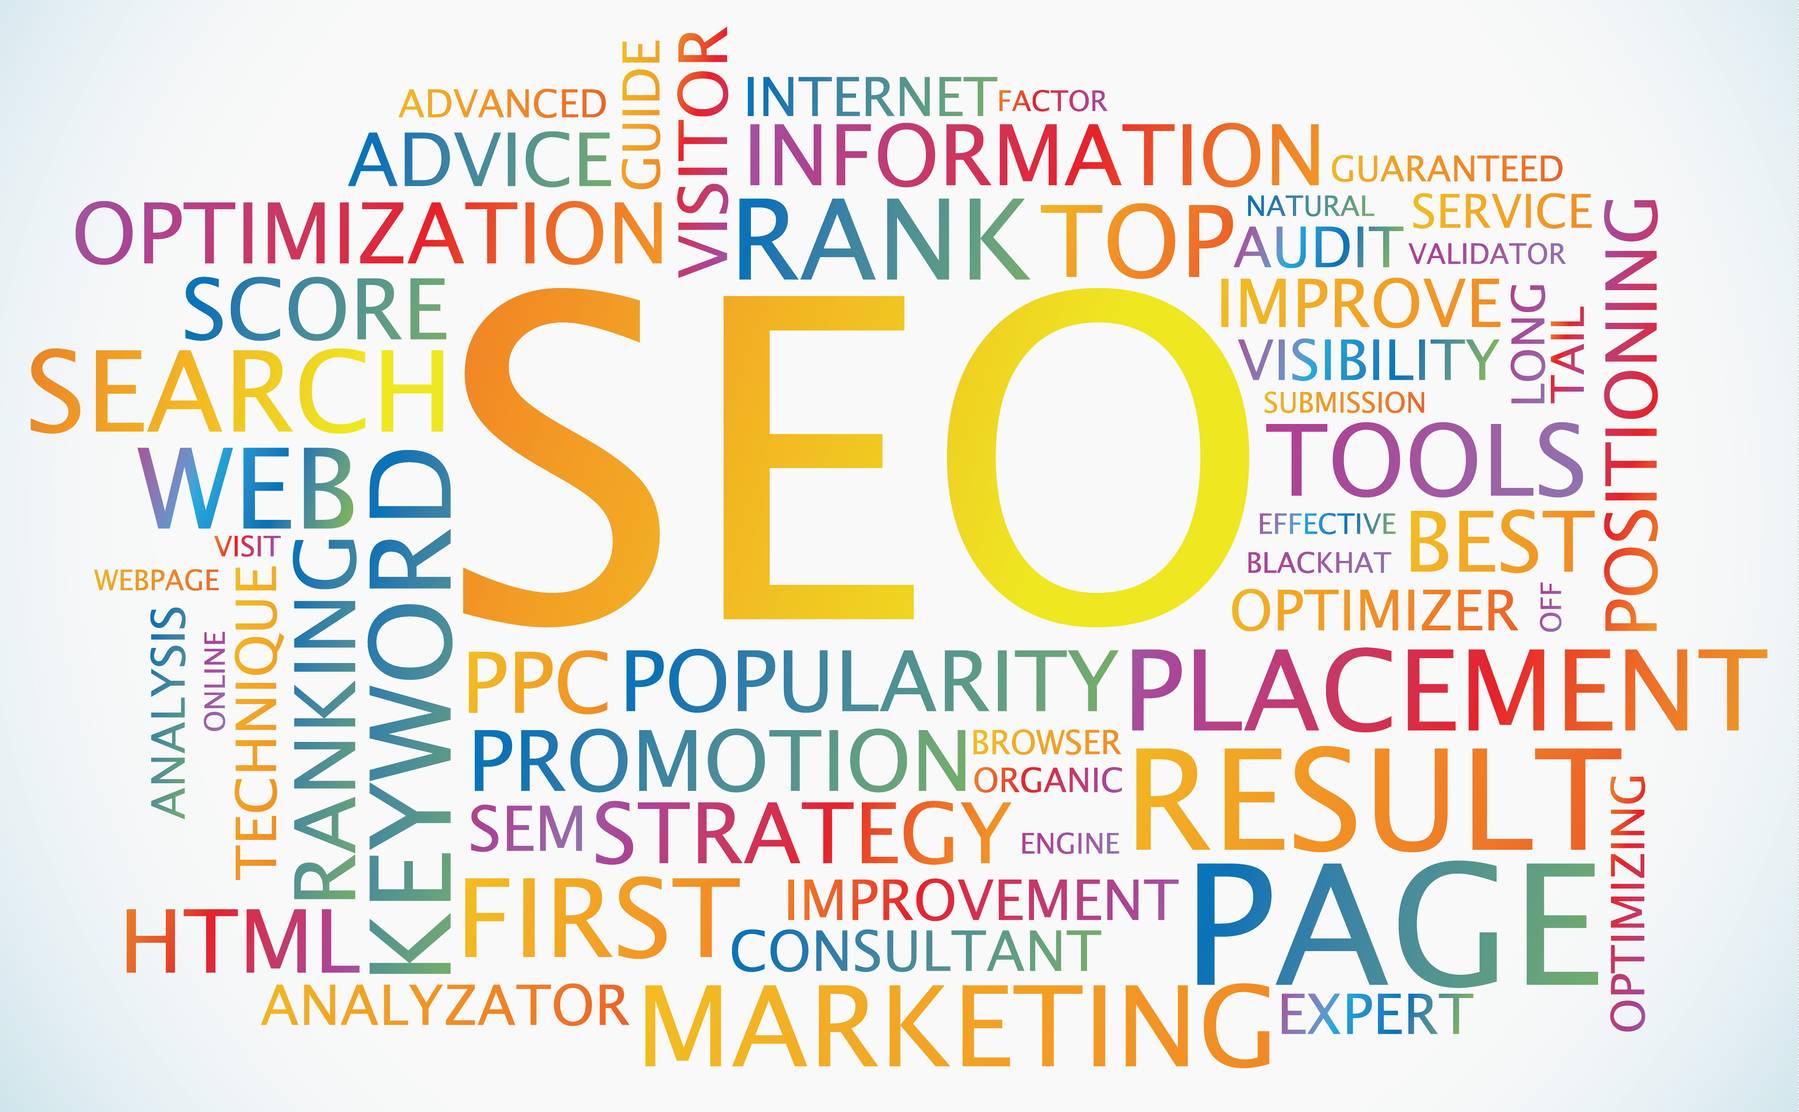 McKinney TX SEO Service: Why You Need A Professional SEO Service